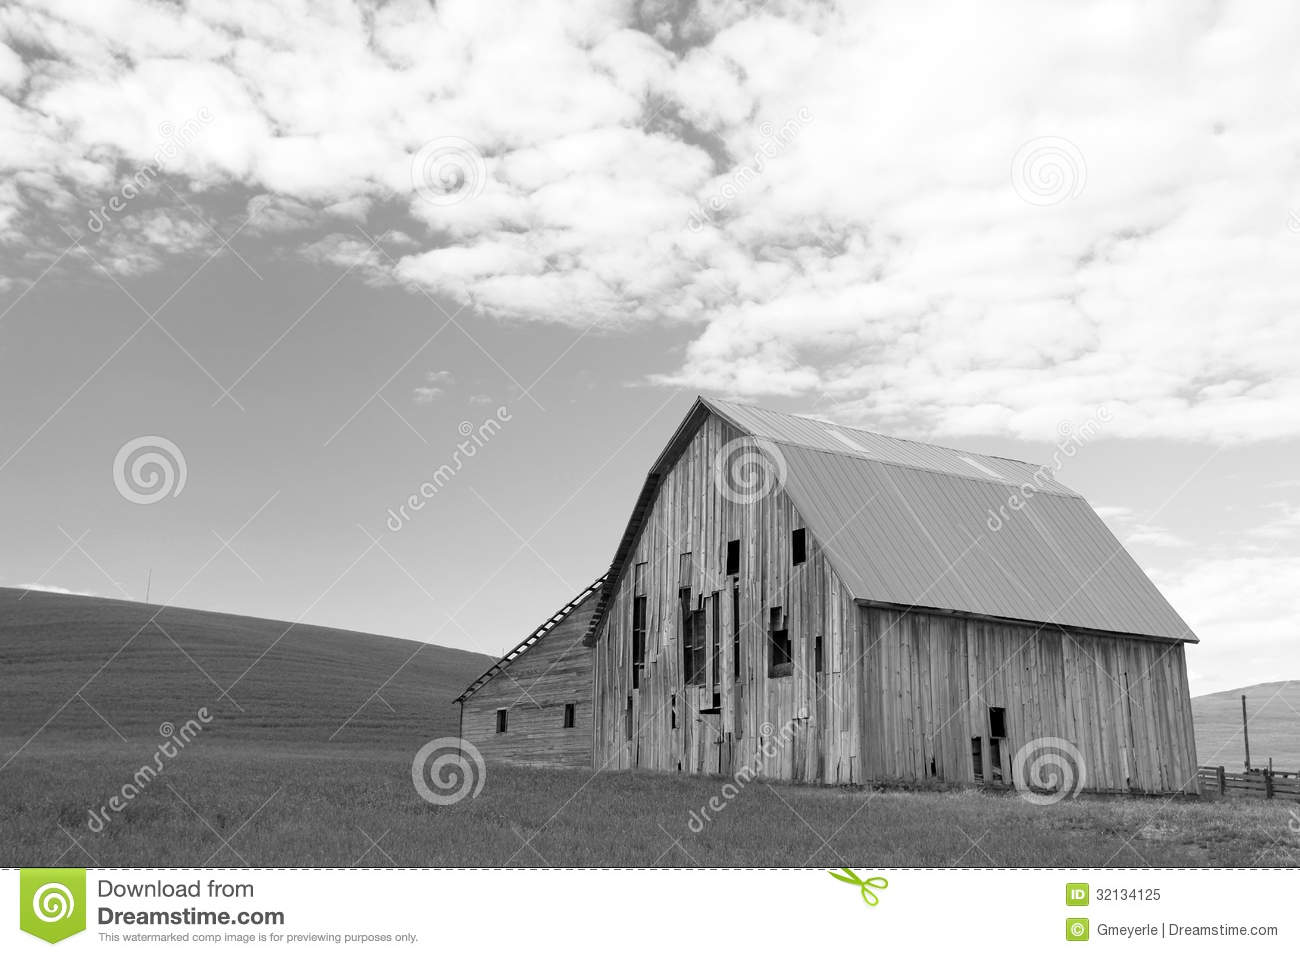 Barn In Hilly Field With Sky Filled With Puffy Clouds In Background